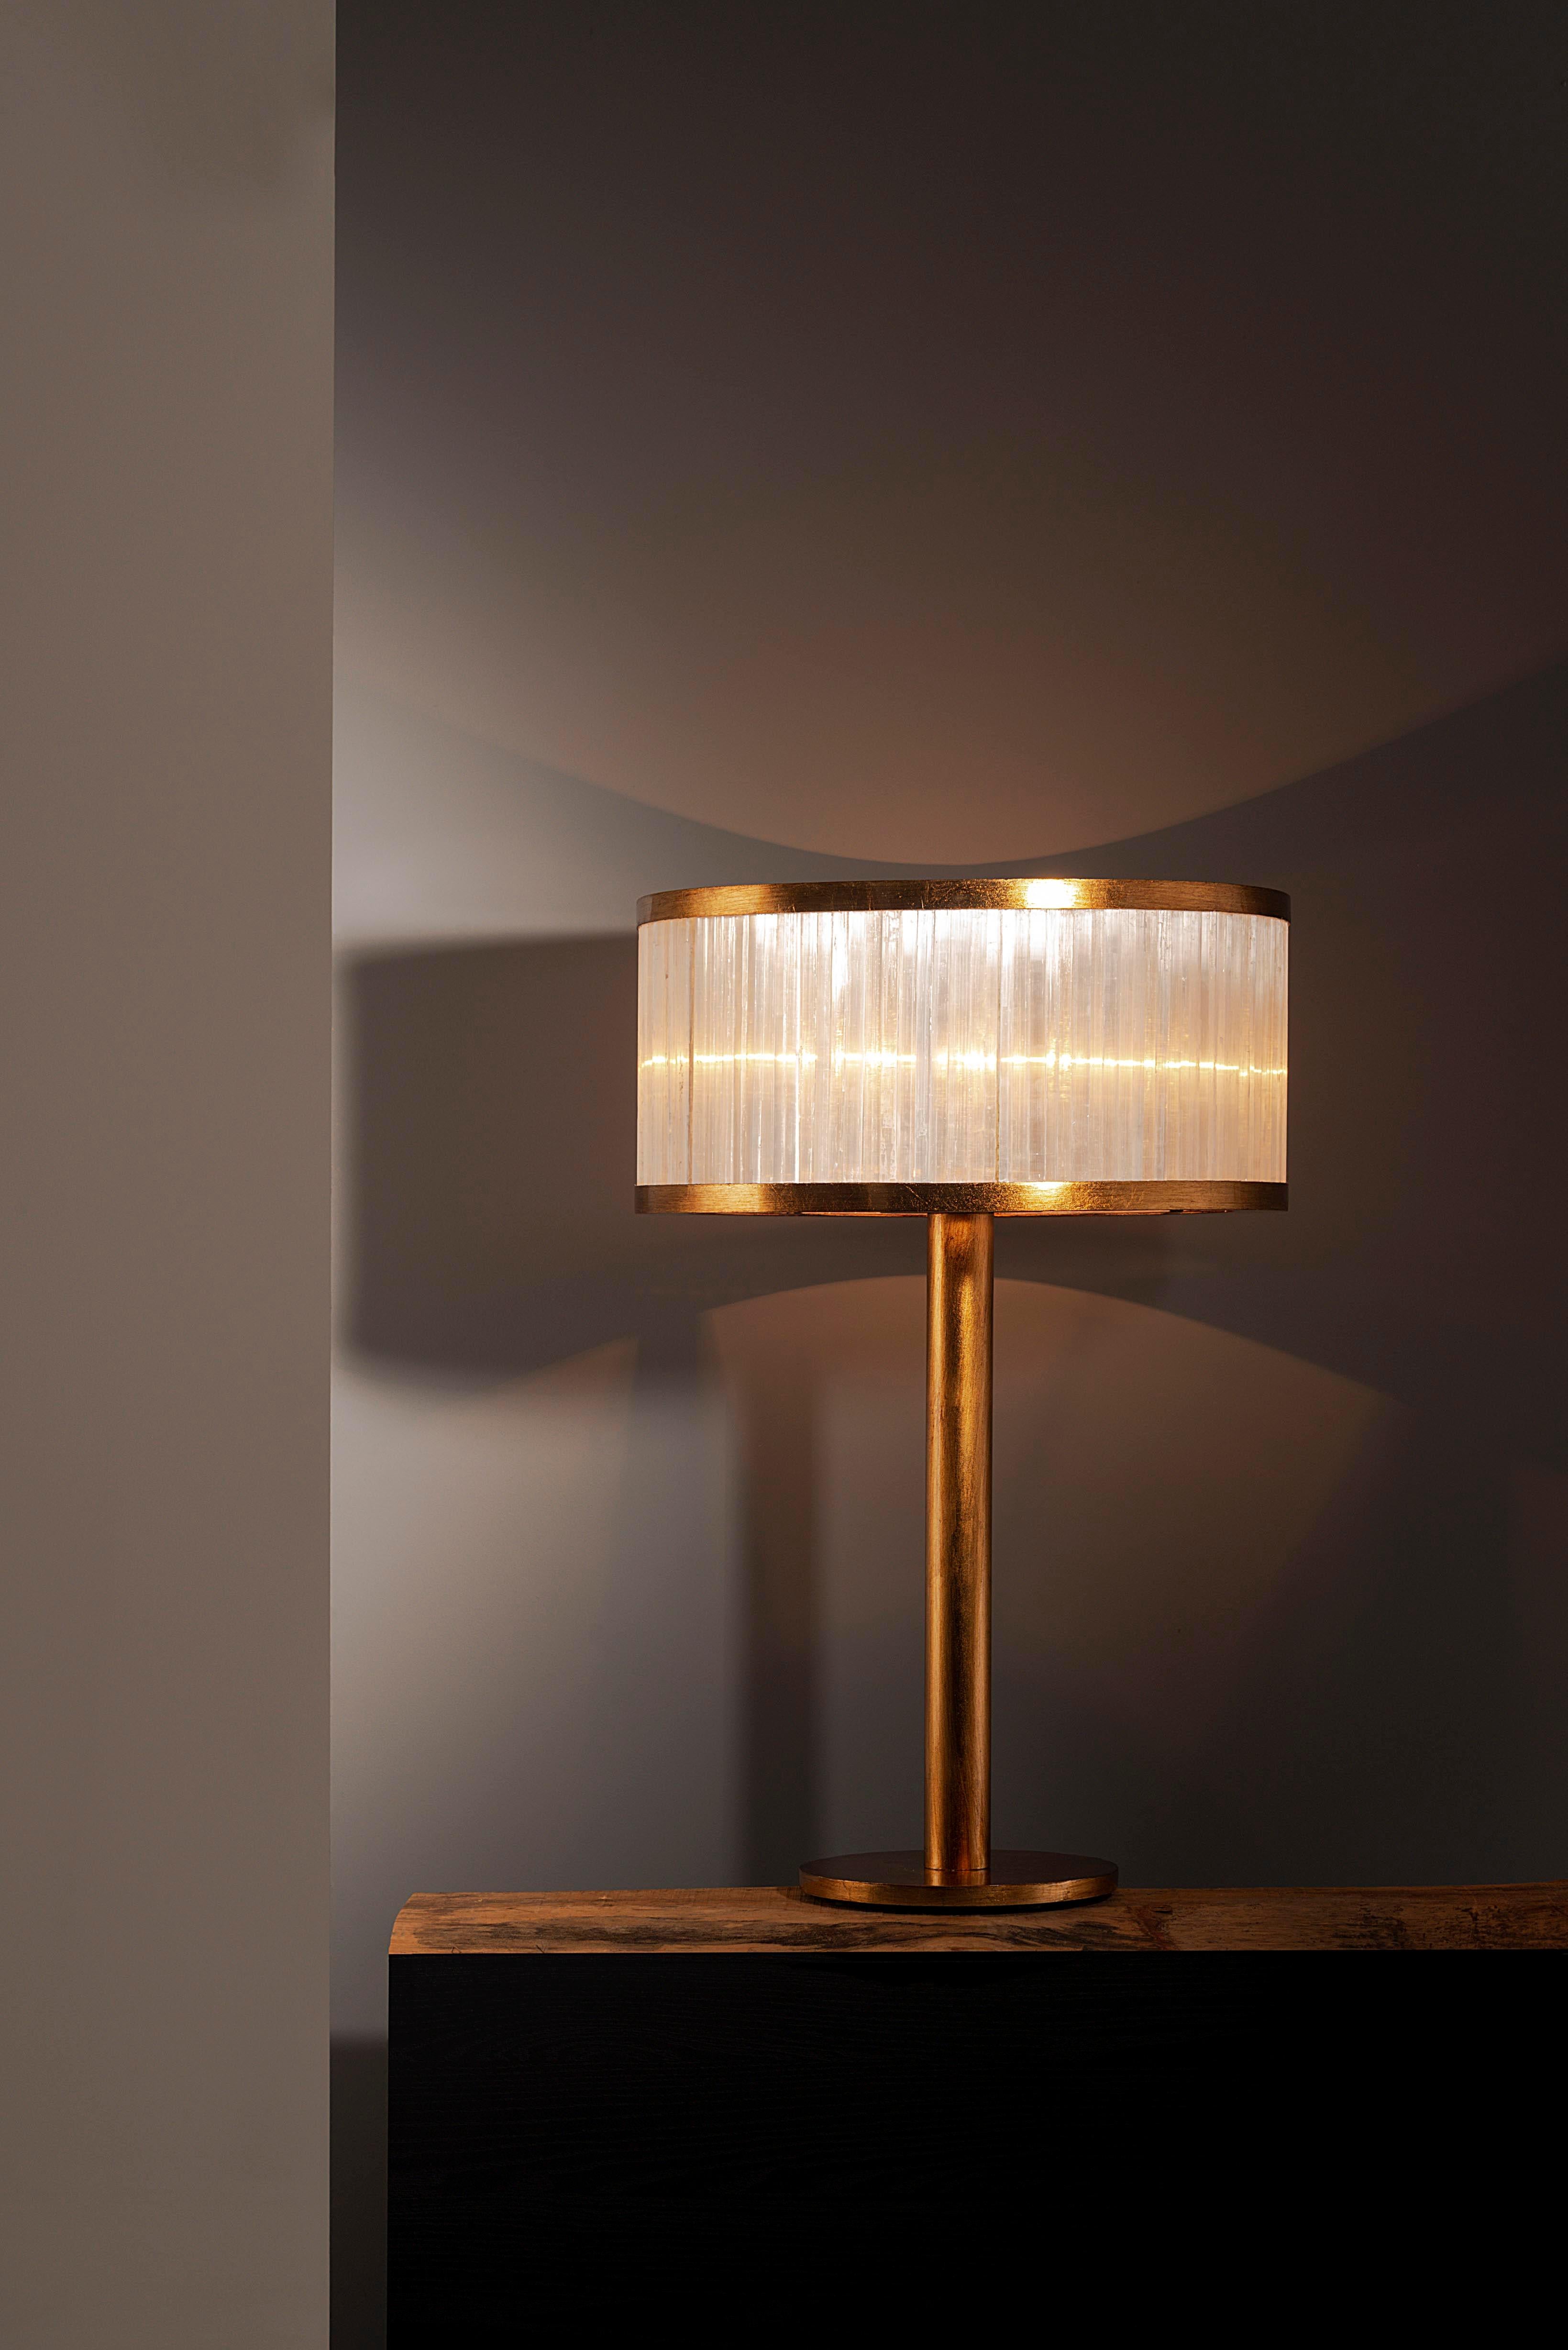 Selenite table lamp by Aver
Dimensions: D 50 x H 74 cm
Materials: Selenite, metal.
Also Available: silver leaf, antique silver leaf, gold leaf, brass leaf, copper leaf, pink gold leaf.

Cylindrical table lamp with a beautiful manual work done